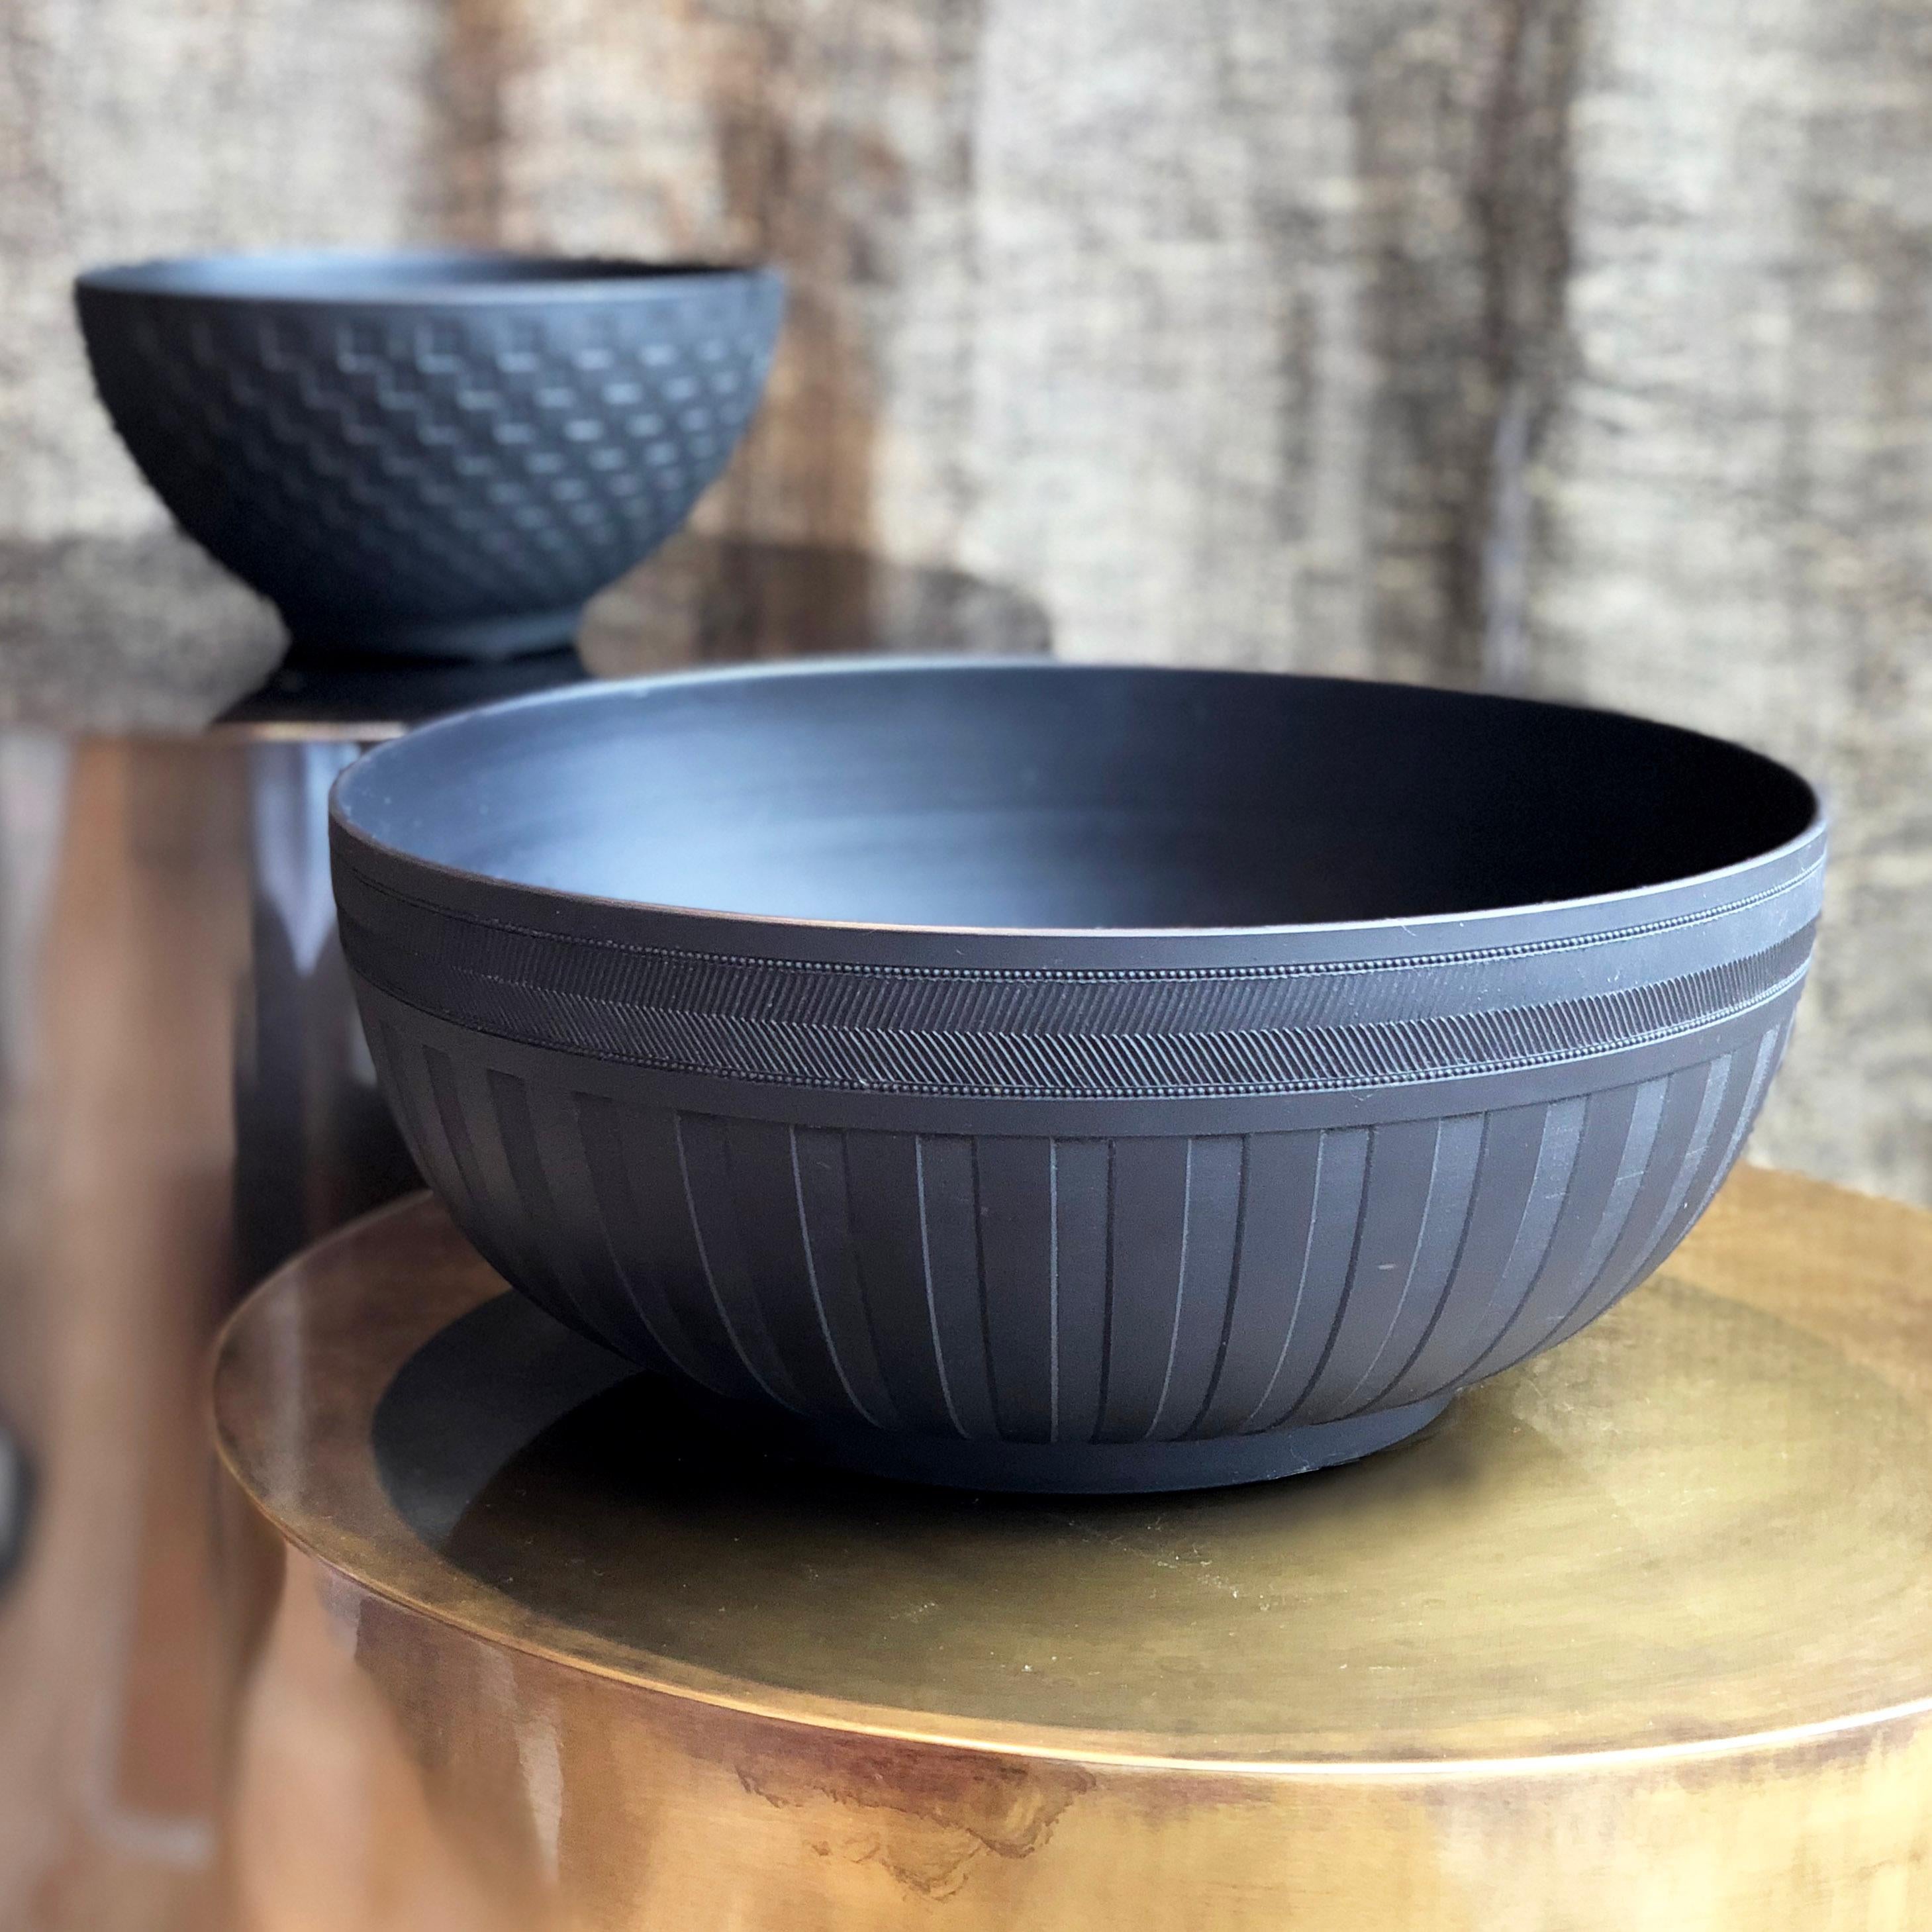 Beautiful basalt Wedgwood bowl from 1930’s, featuring a striped motif.

29Dia x 12H cm

Good vintage condition